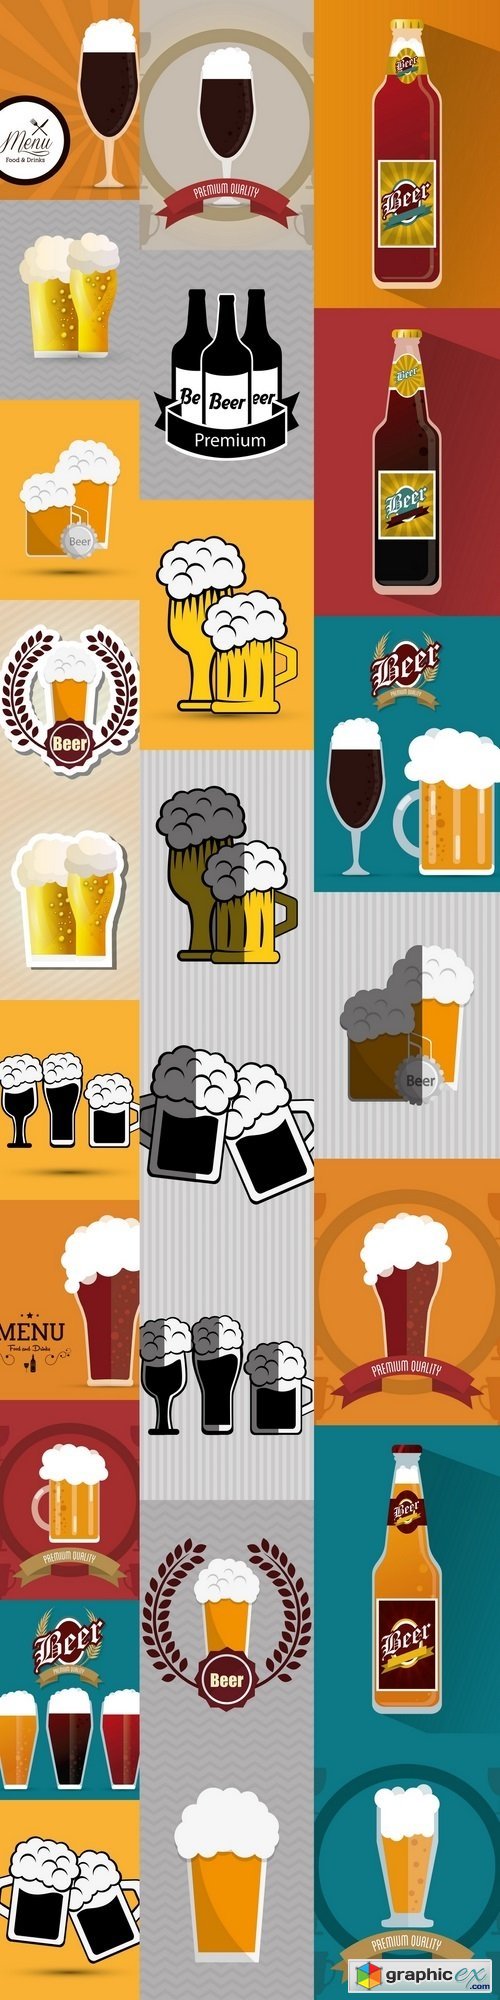 Beer icon design 4